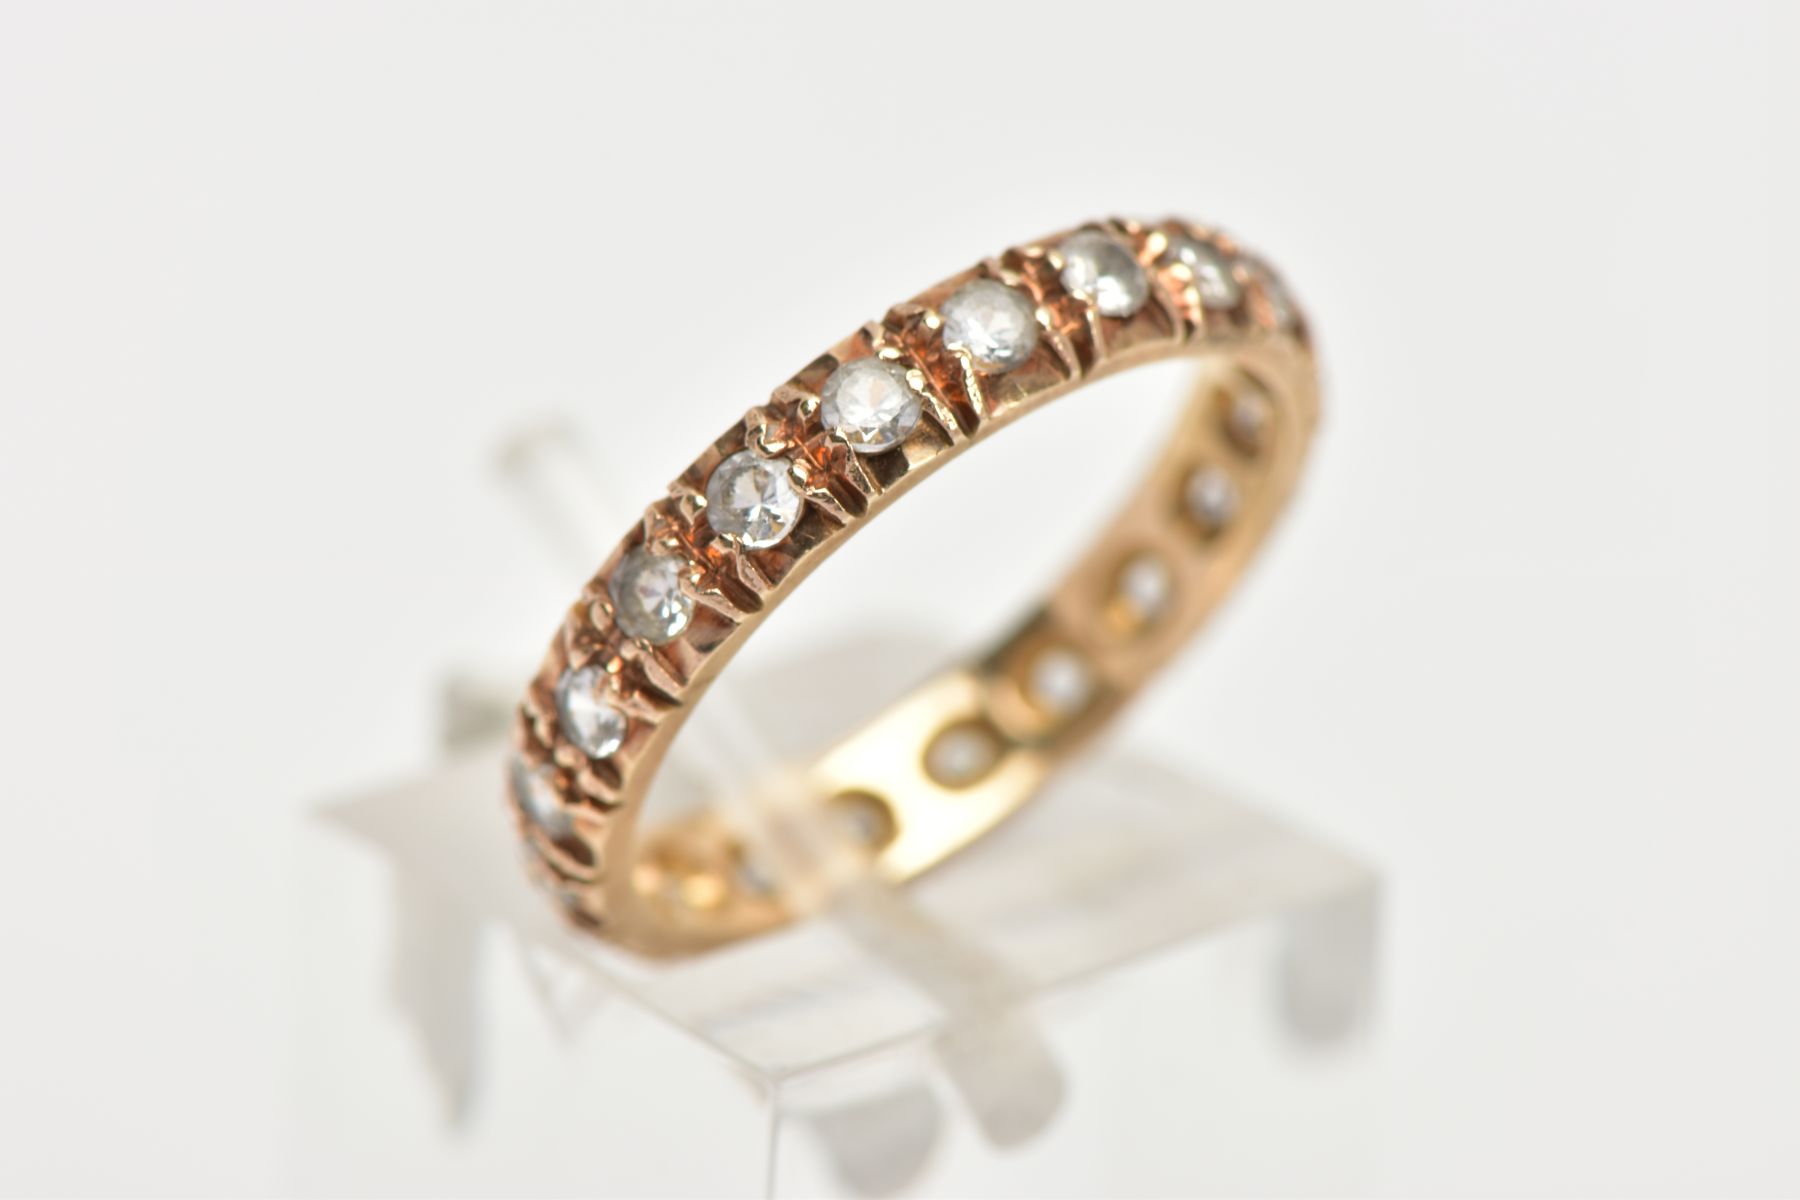 A 9CT GOLD FULL ETERNITY RING, set with circular cut colourless cubic zirconia, hallmarked 9ct - Image 4 of 4